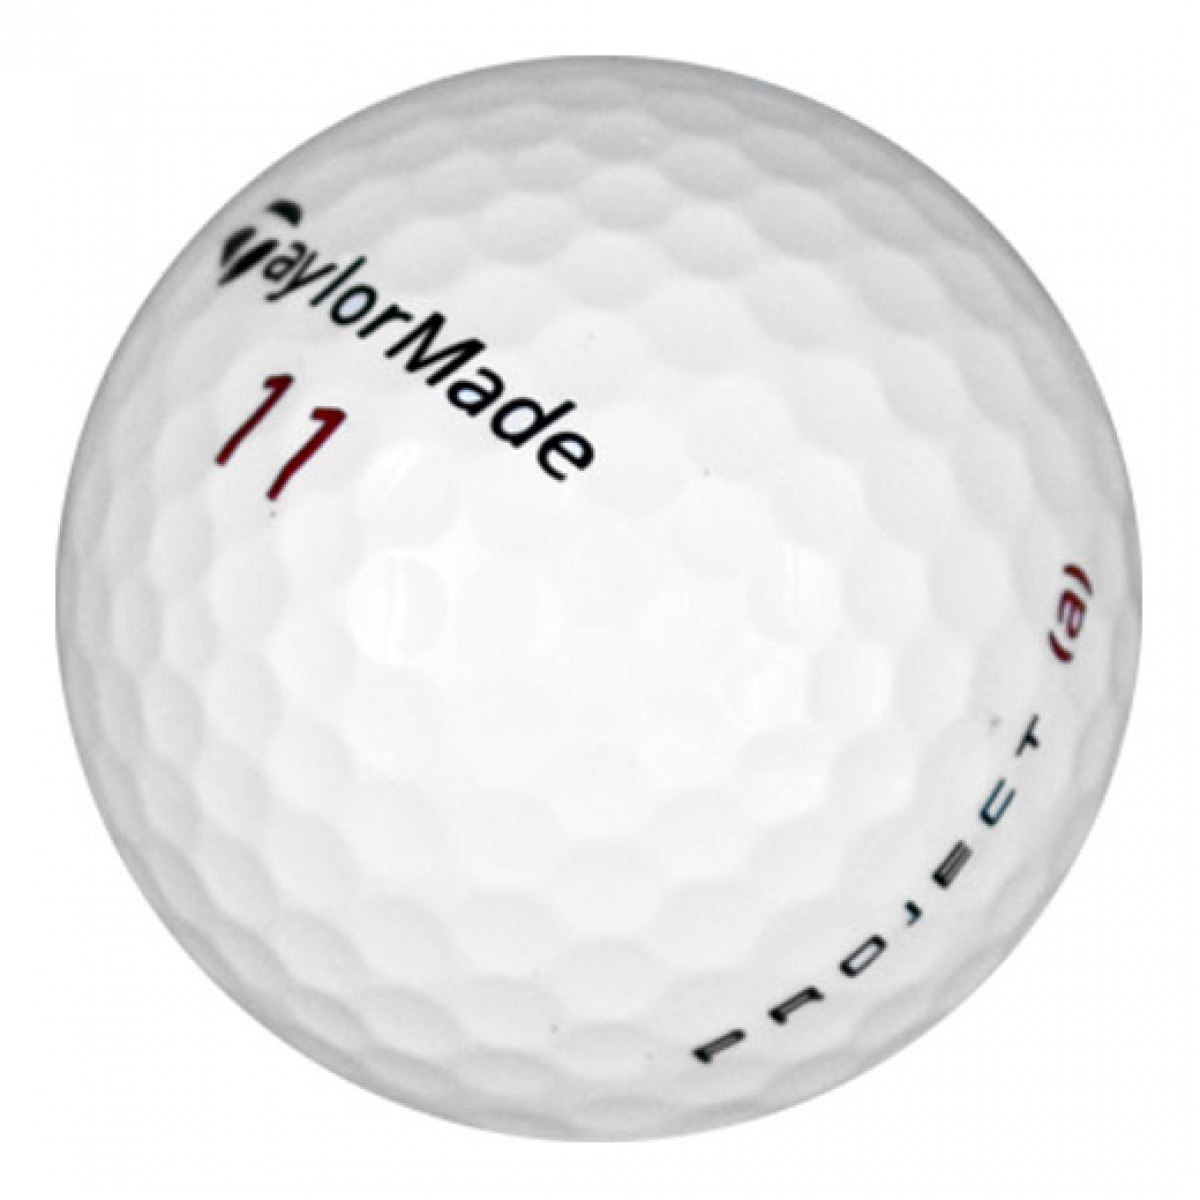 TaylorMade Project (a) used golf balls